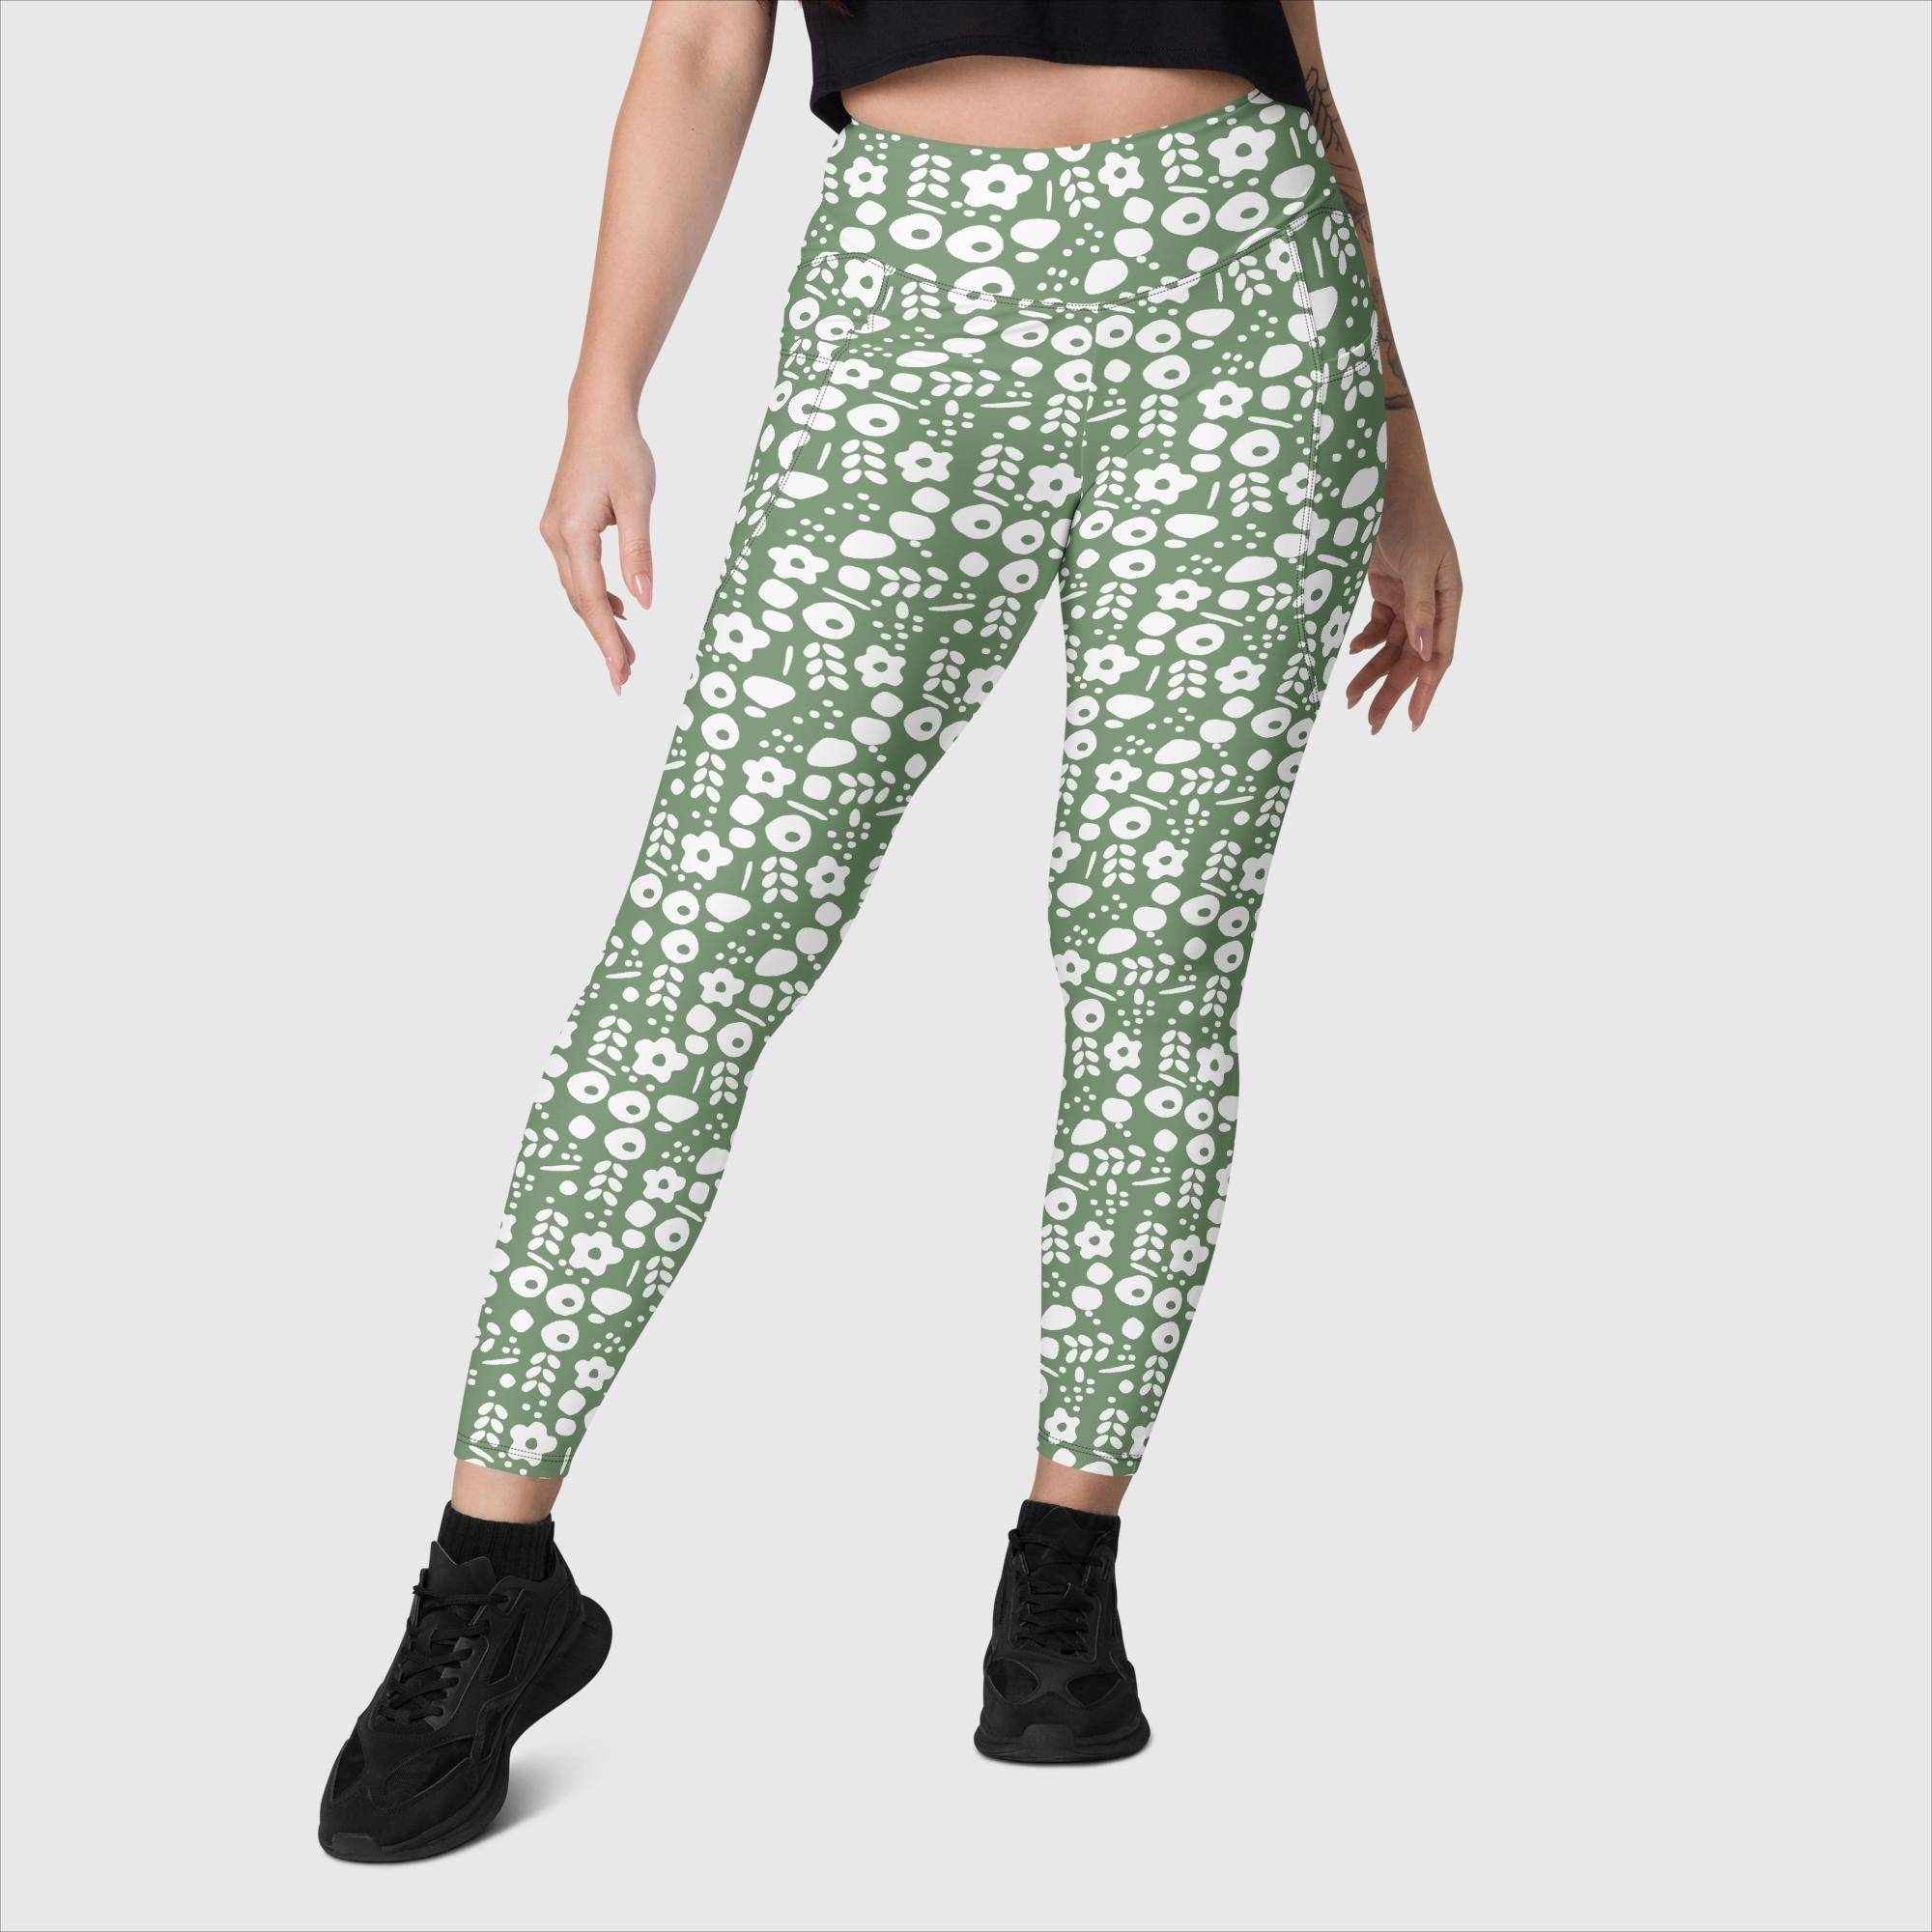 Women’s Leggings with Side Pockets High Waist Support - Revive Wear     Handmade Pocket Leggings for Yoga, Pilates & Meditation. High-waisted cut, exceptional comfort and two practical side pockets. Get yours now!